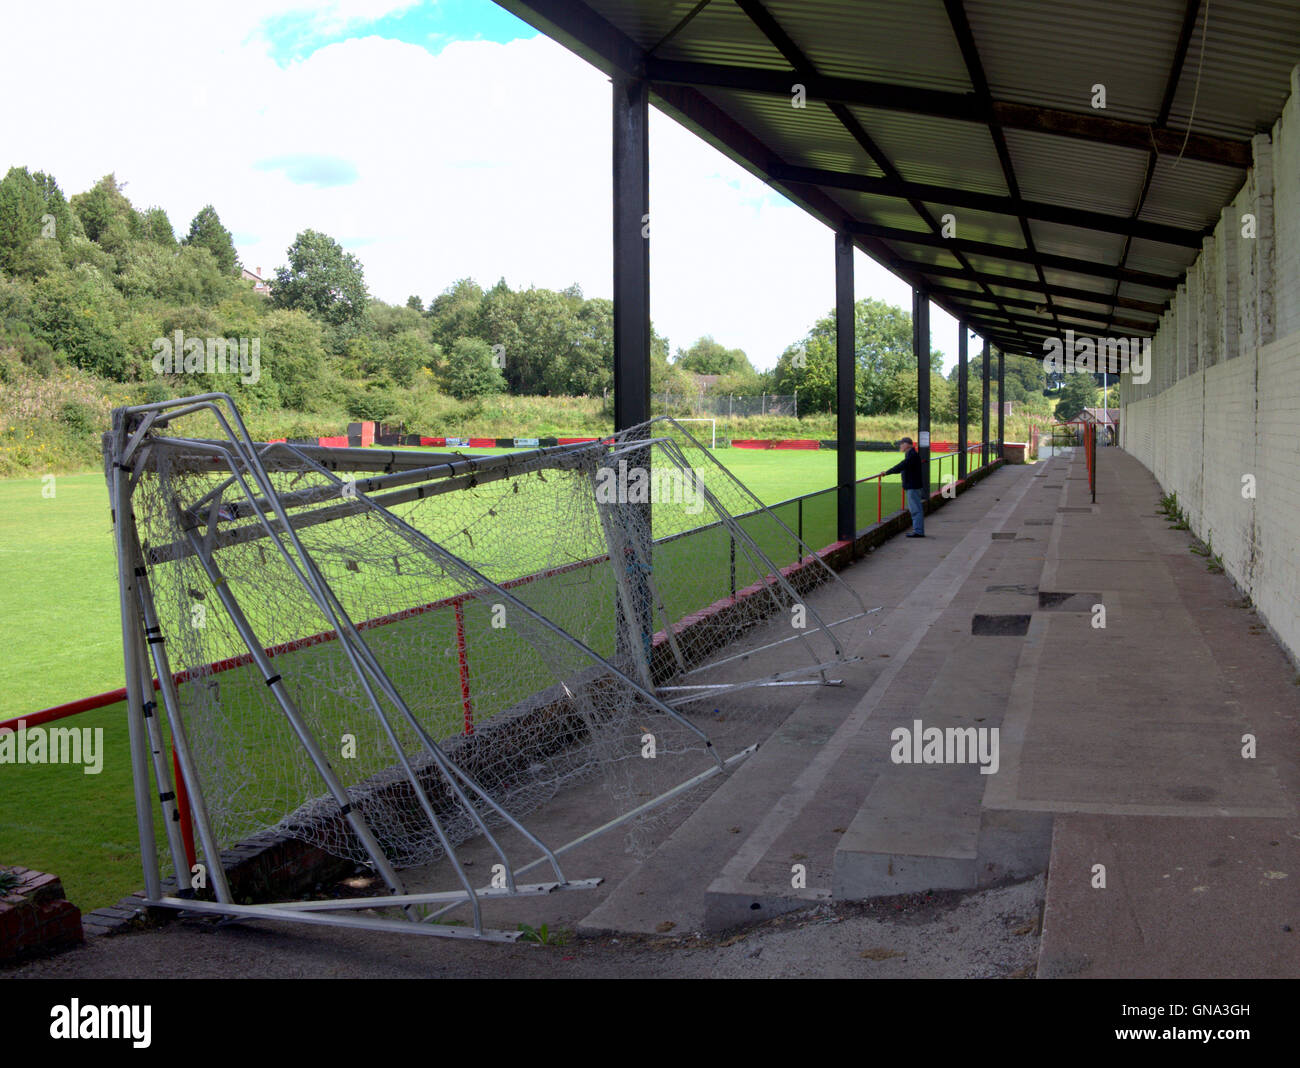 Glasgow, Scotland, UK 29th August 2016. Drumchapel Amateur F.C.privided the humble beginnings of Sir Alex Ferguson, David Moyes and Andy Gray yet play at Glenhead Park, Duntocher. An interesting contrast to the stadiums they graduated to later in their careers. © Gerard Ferry/Alamy Live News Stock Photo